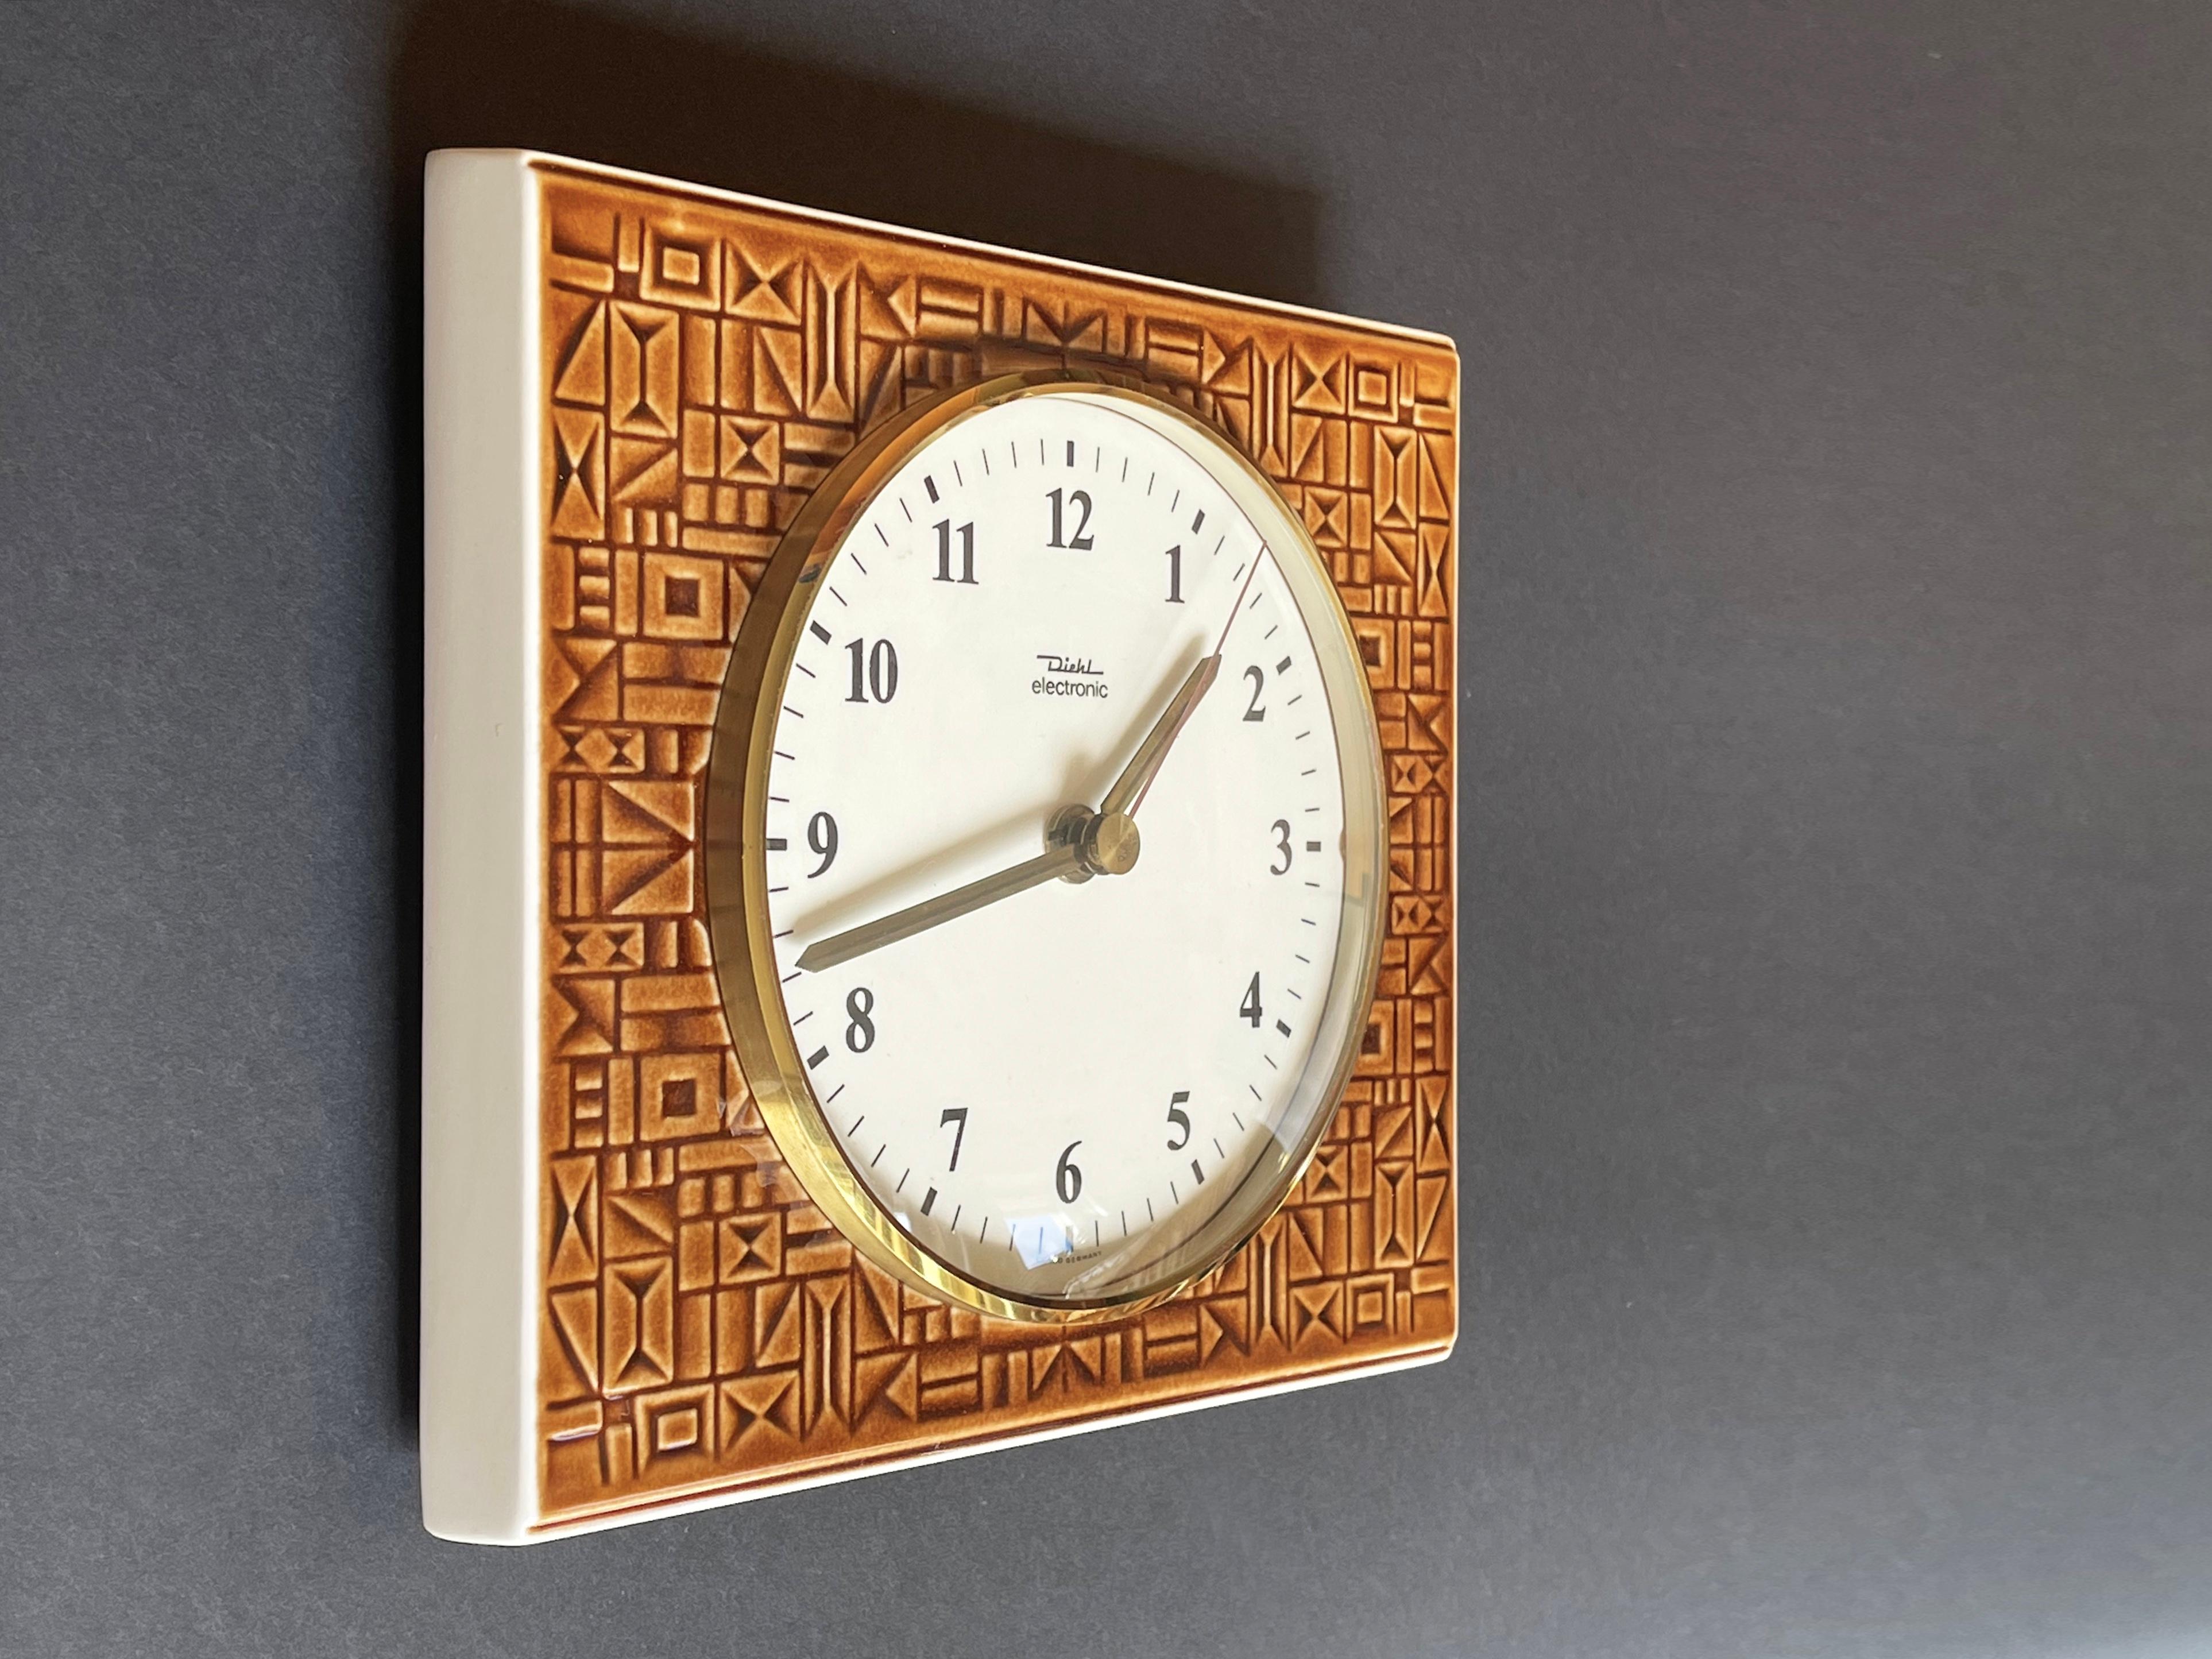 Outstanding colours & design by one of the oldest famous German watch- and clock maker Diehl.
Quite a futuristic approach, a masterpiece of mid-century design.
Made in the 1960s, this wall clock is made from a caramel & natural white glazed